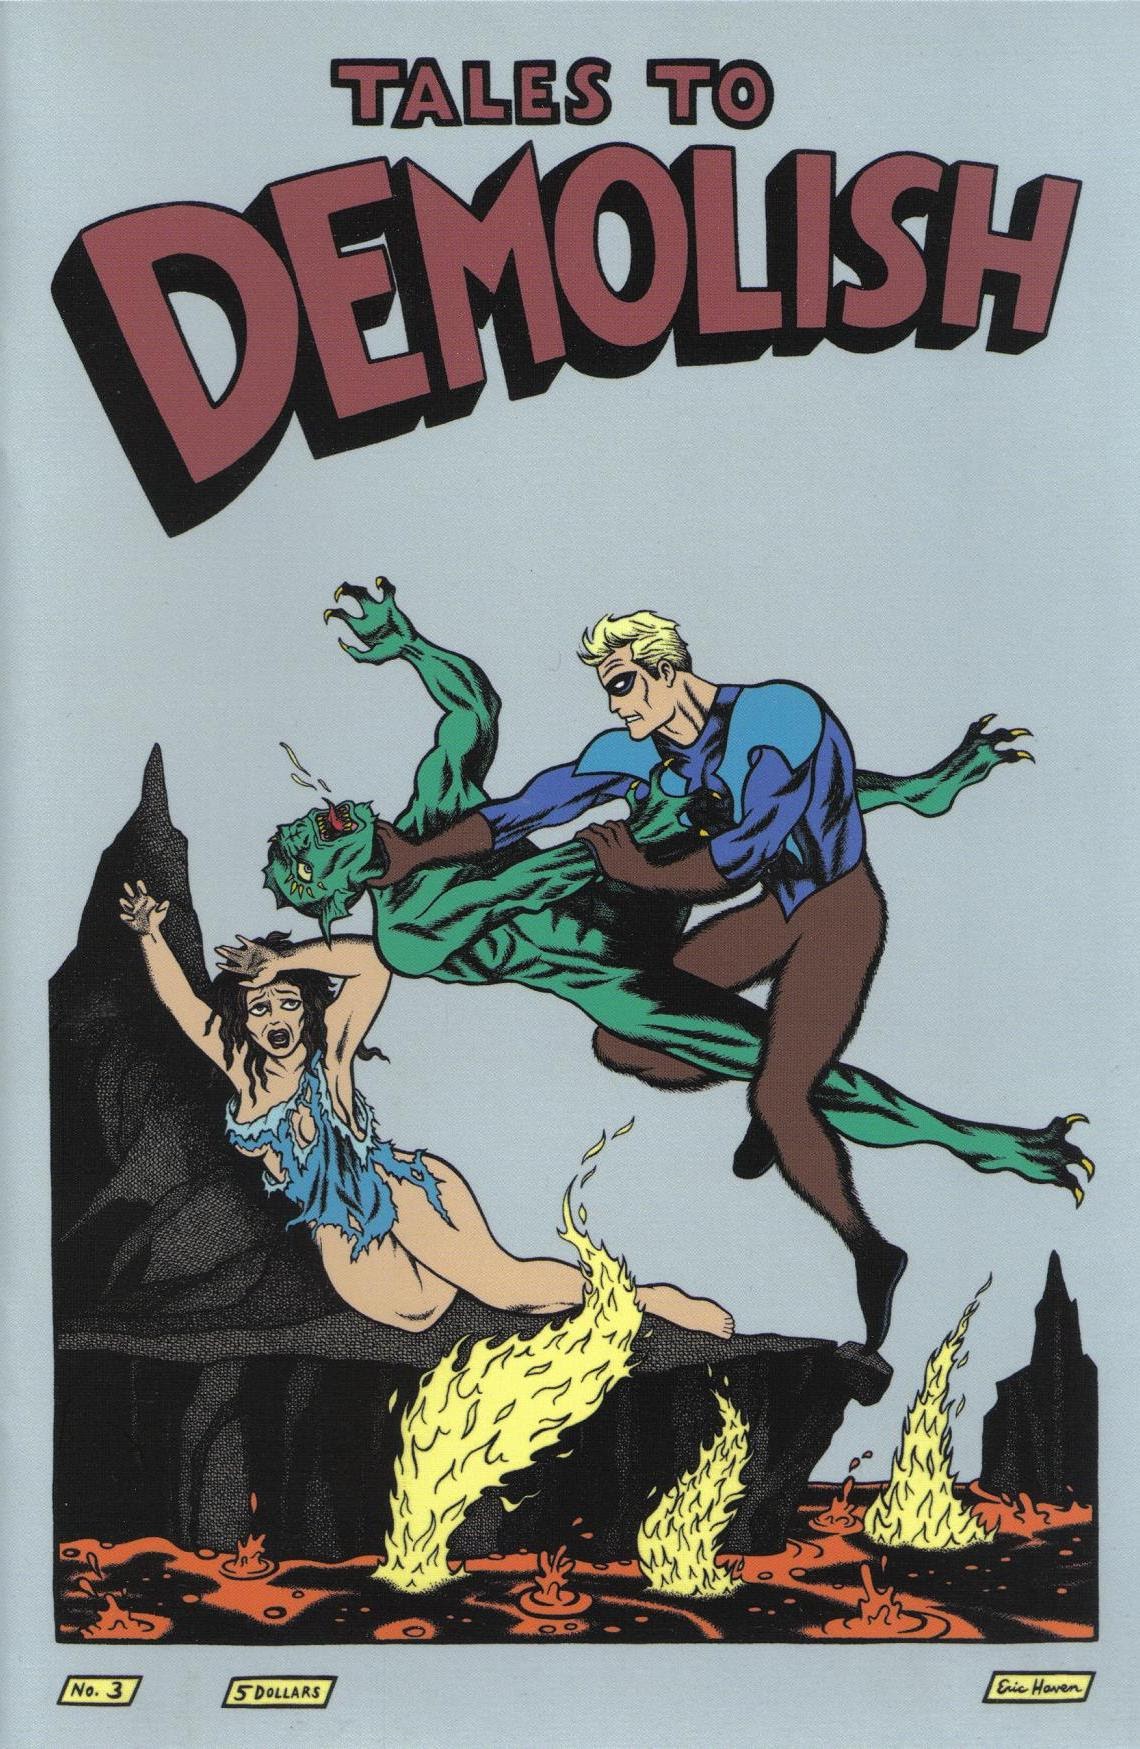 Read online Tales to Demolish comic -  Issue #3 - 1